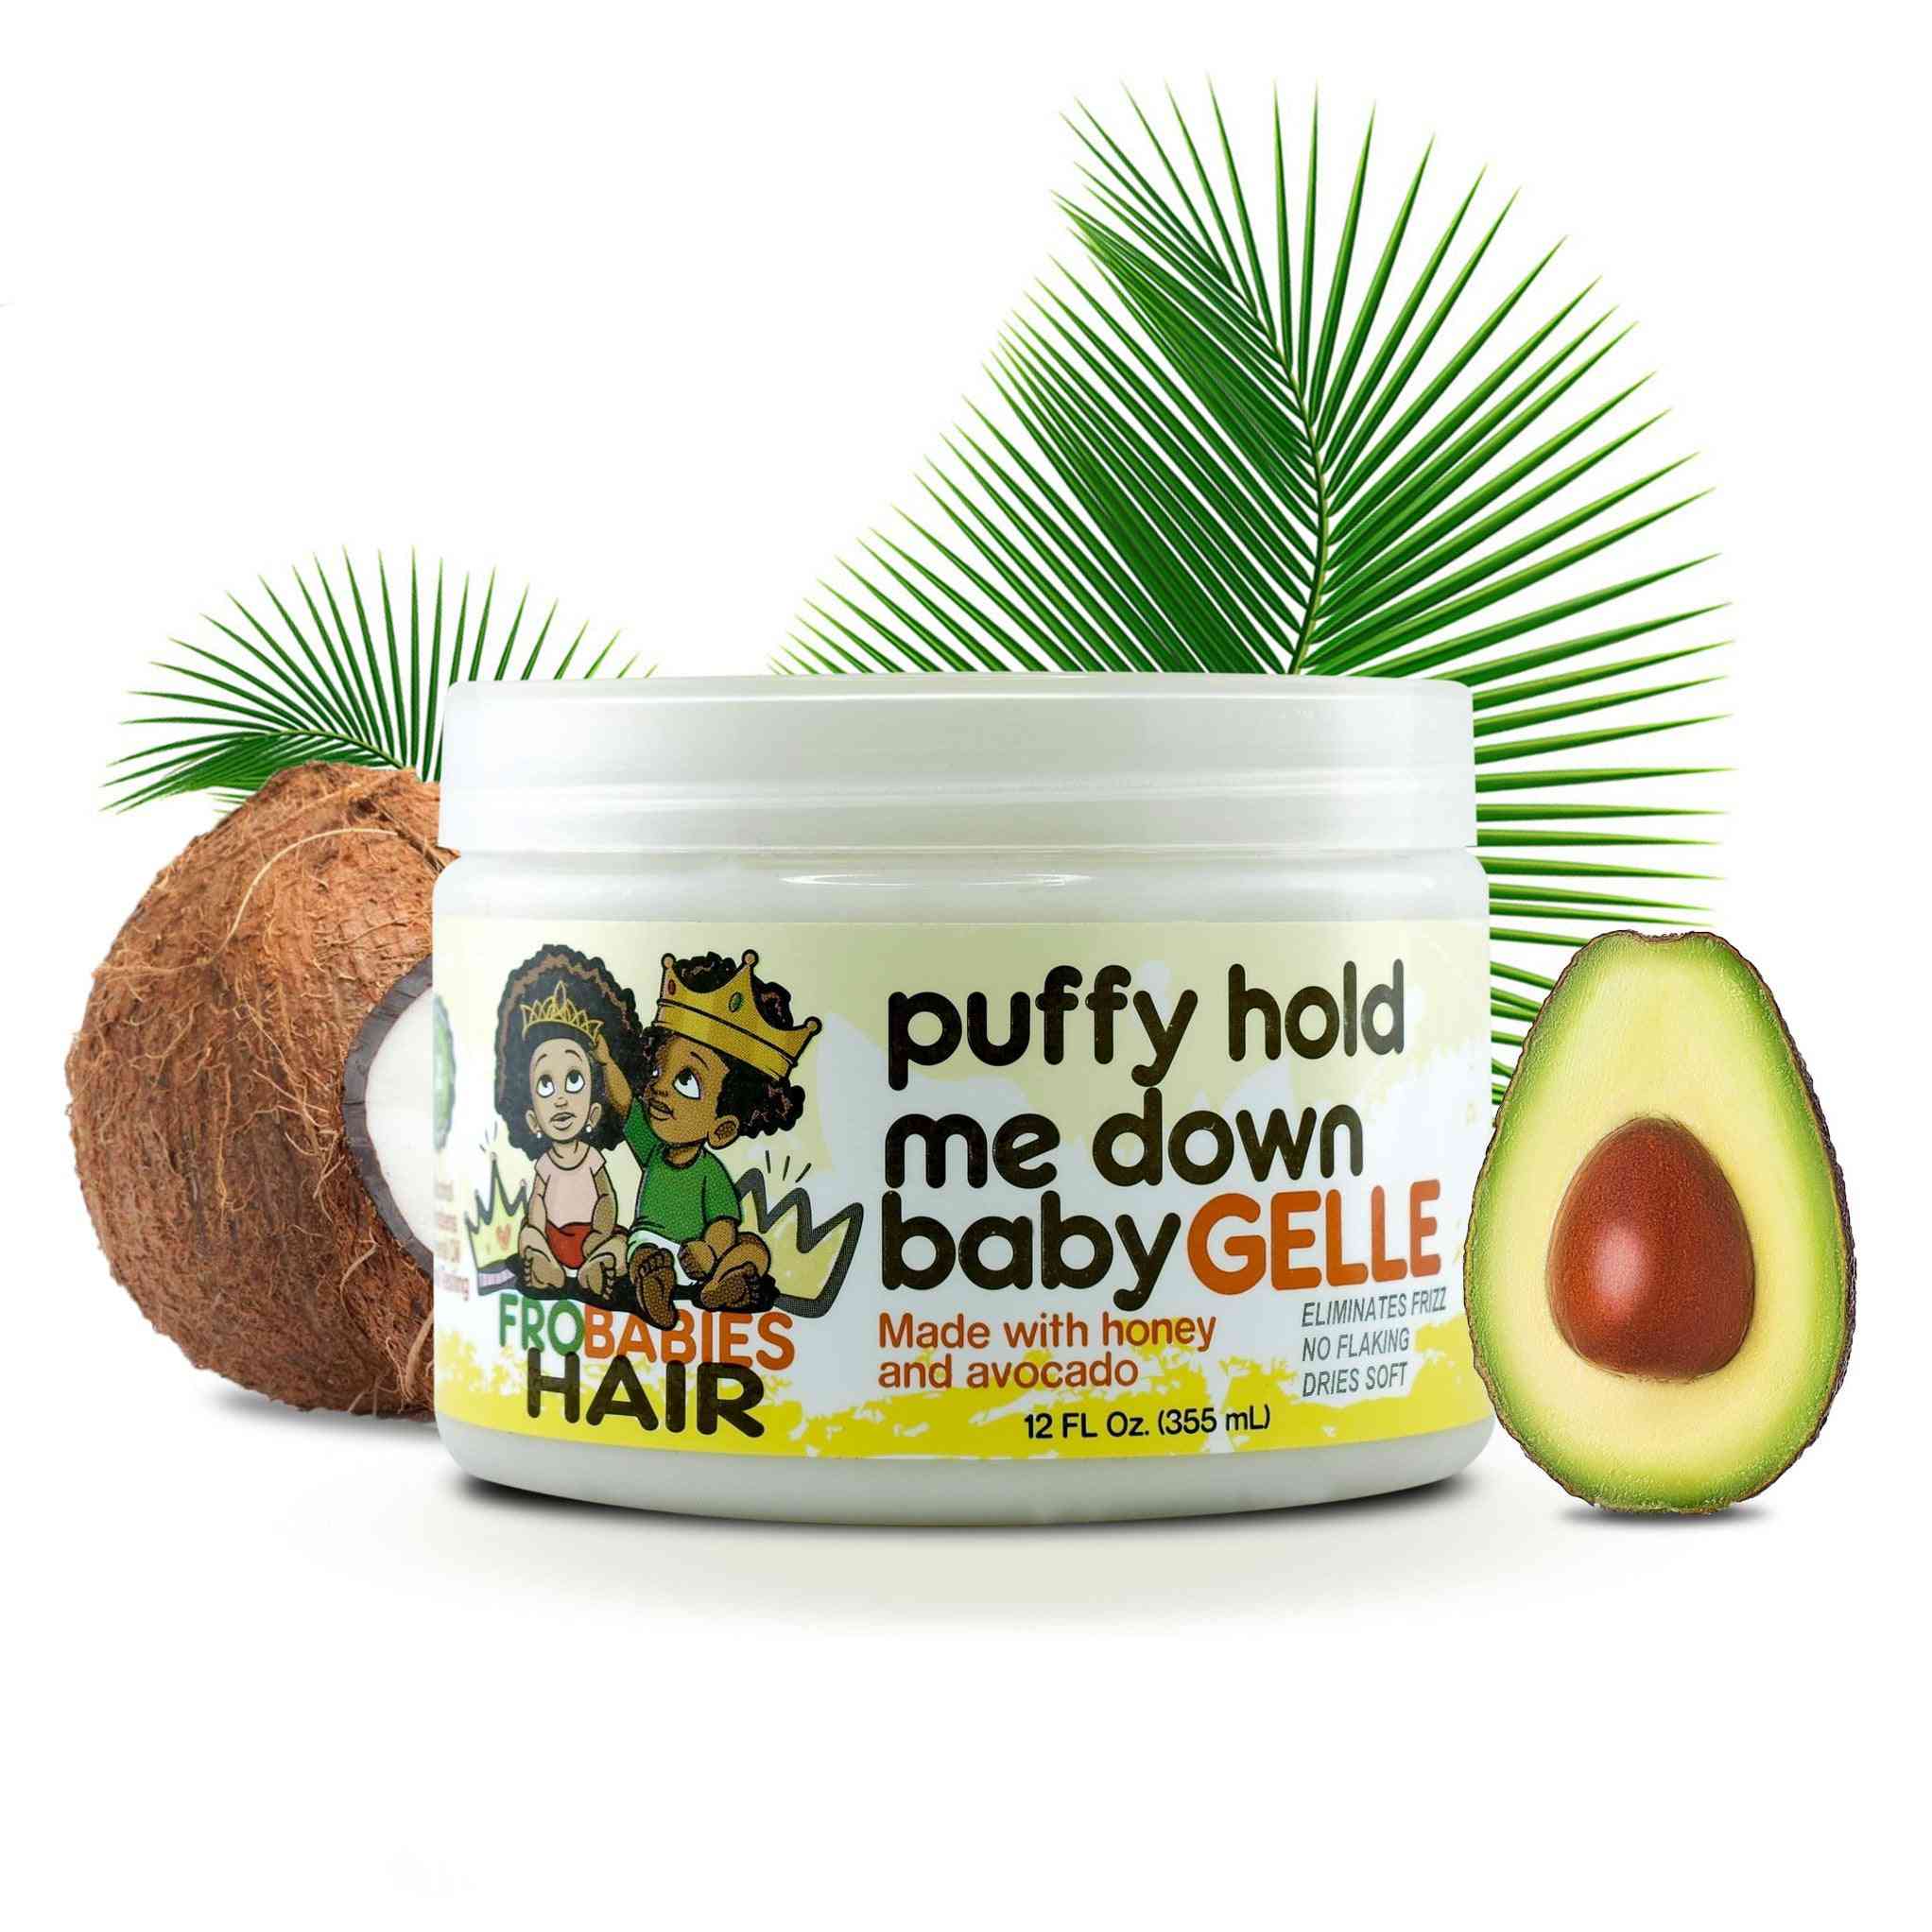 Frobabies hair puffy hold me down baby gelle 12 oz